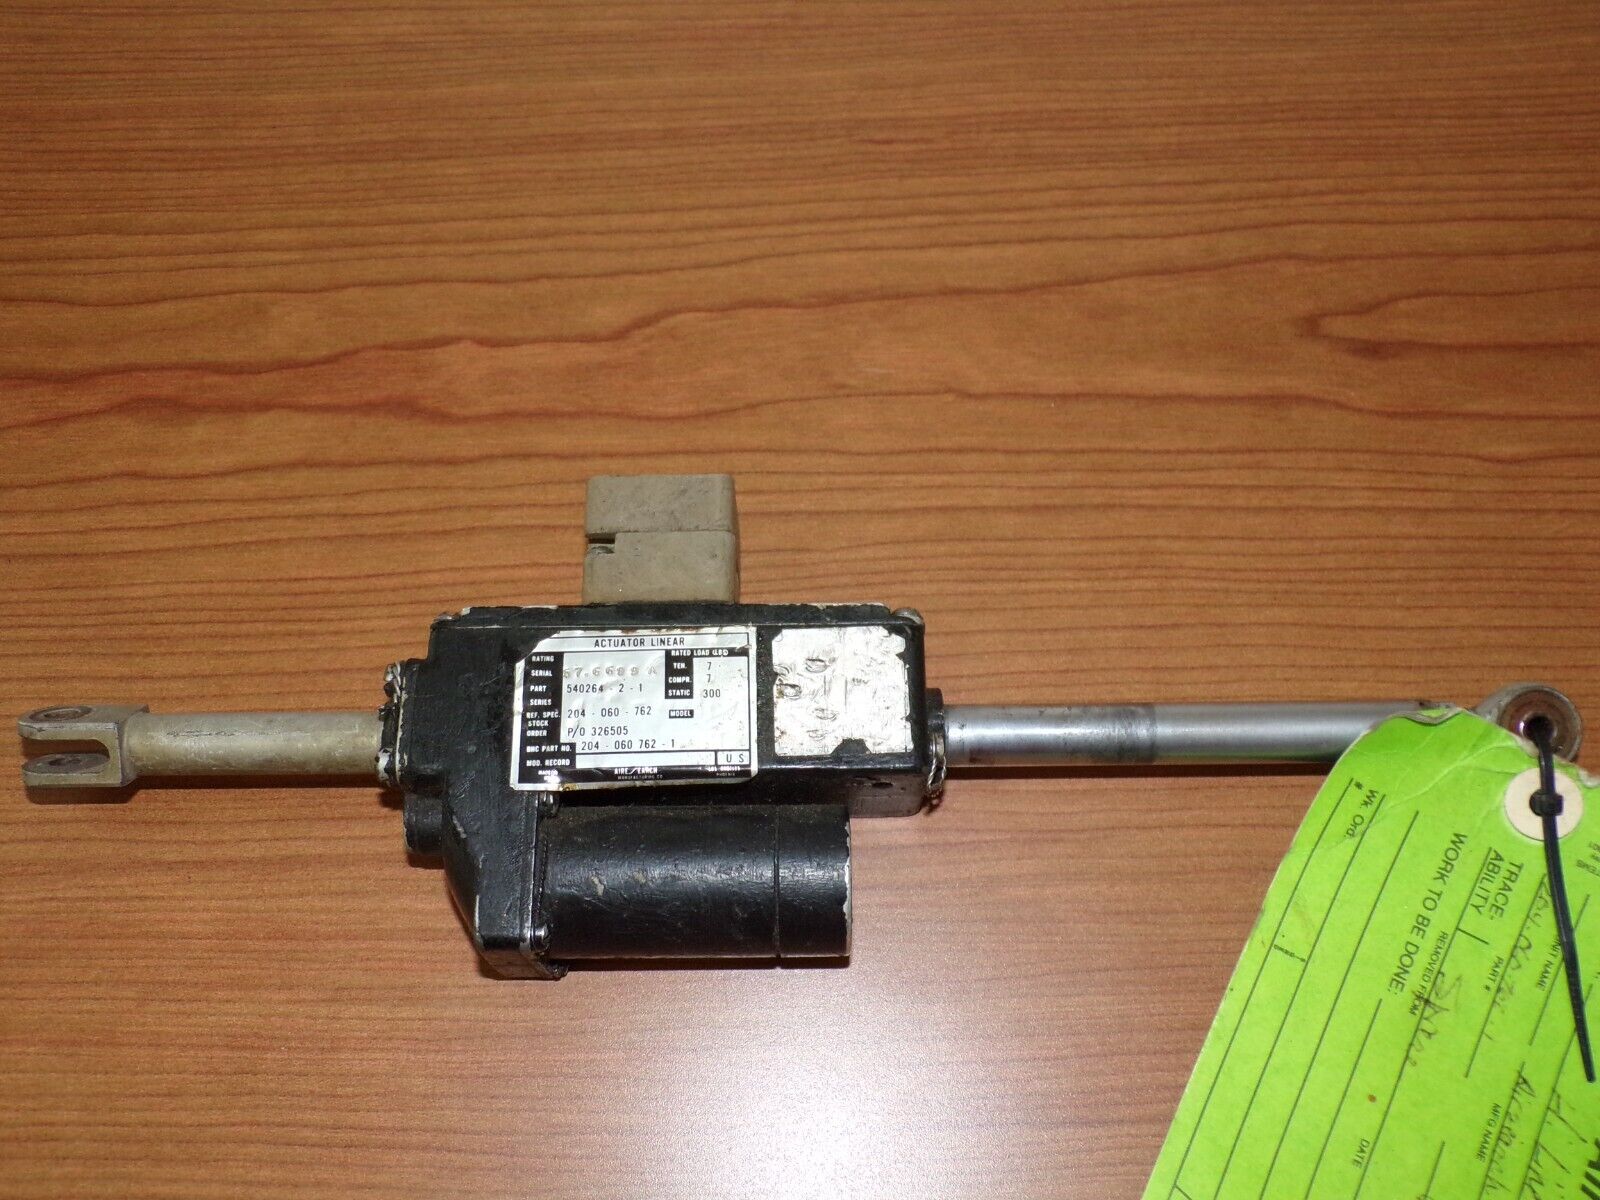 Airesearch Linear Actuator 540264-2-1 Bell Helicopter 204-060-762-1